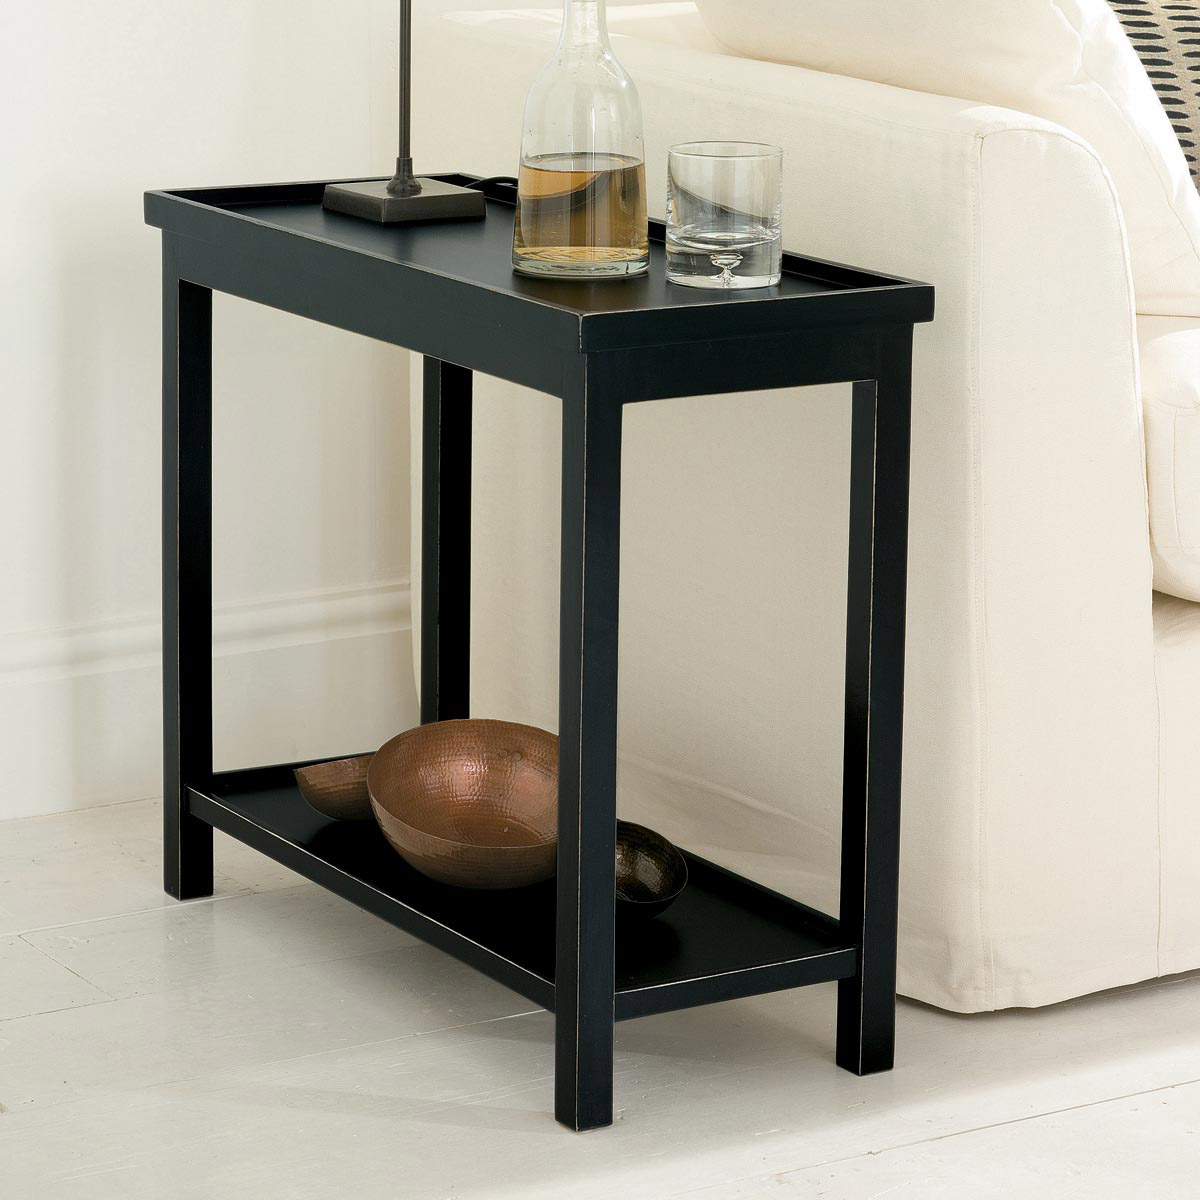 jet rubbed black narrow wooden side table oka sofa end tables low asian coffee unfinished corner cabinets for dining room pottery barn buchanan kmart outdoor bistro sets sears